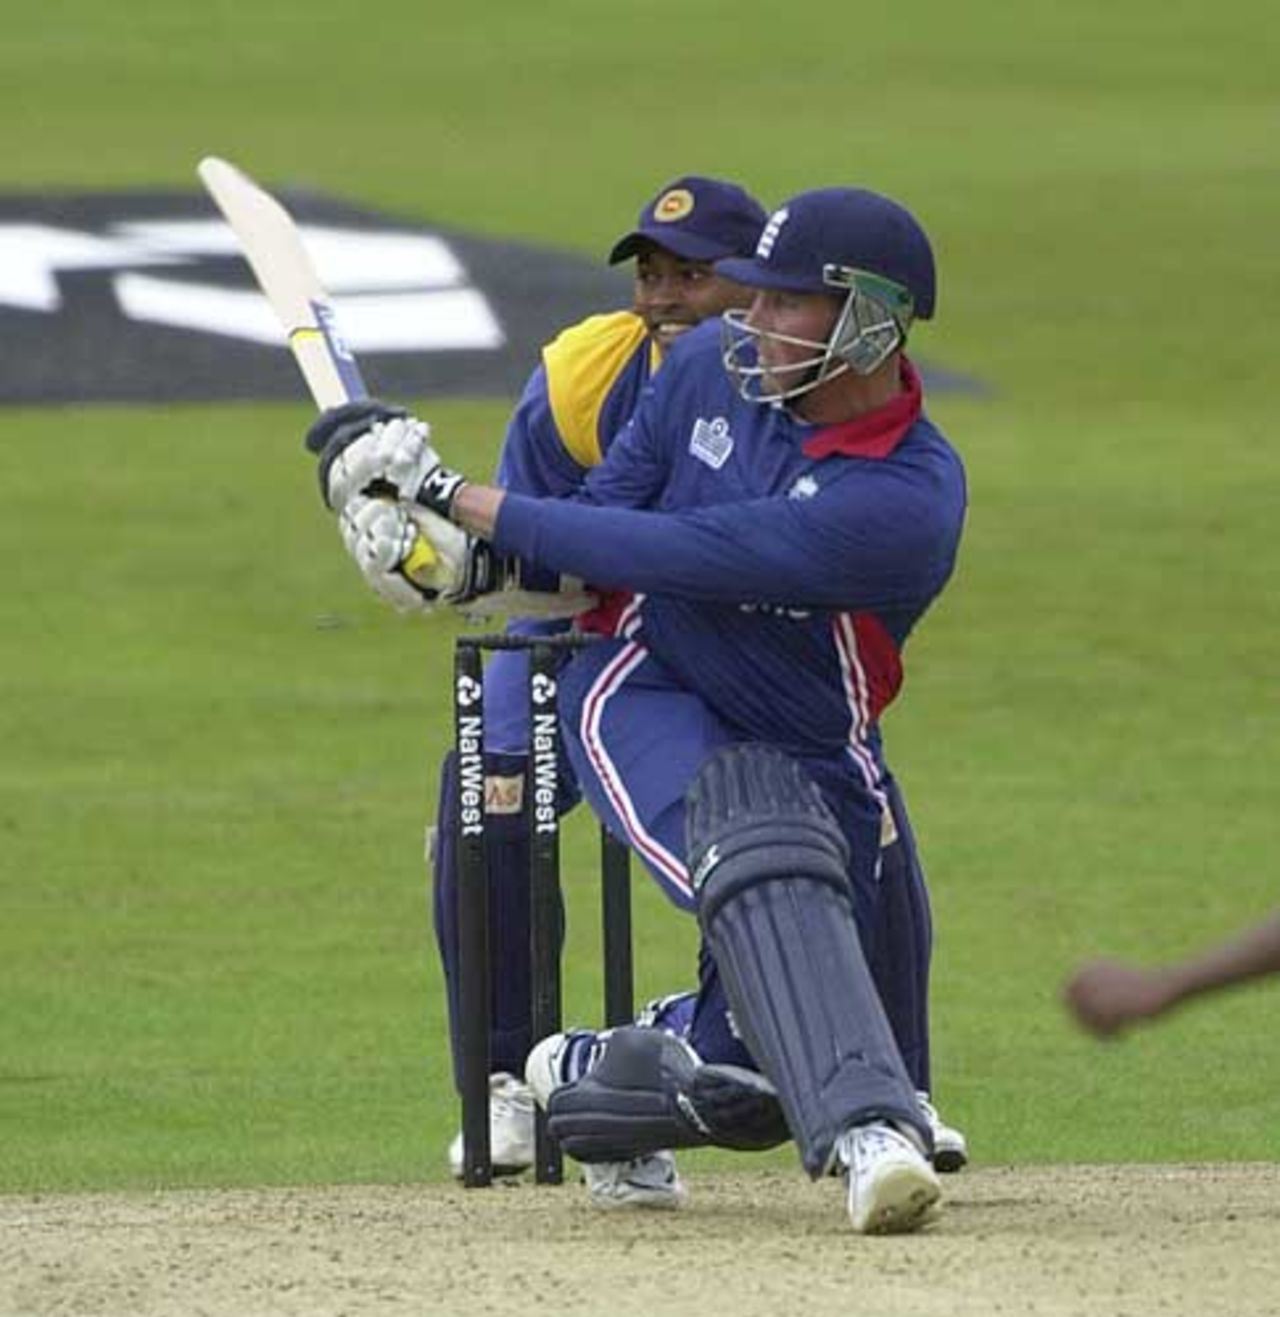 Trescothick with a pull to leg in his innings of 82, England v Sri Lanka at Leeds, July 2002